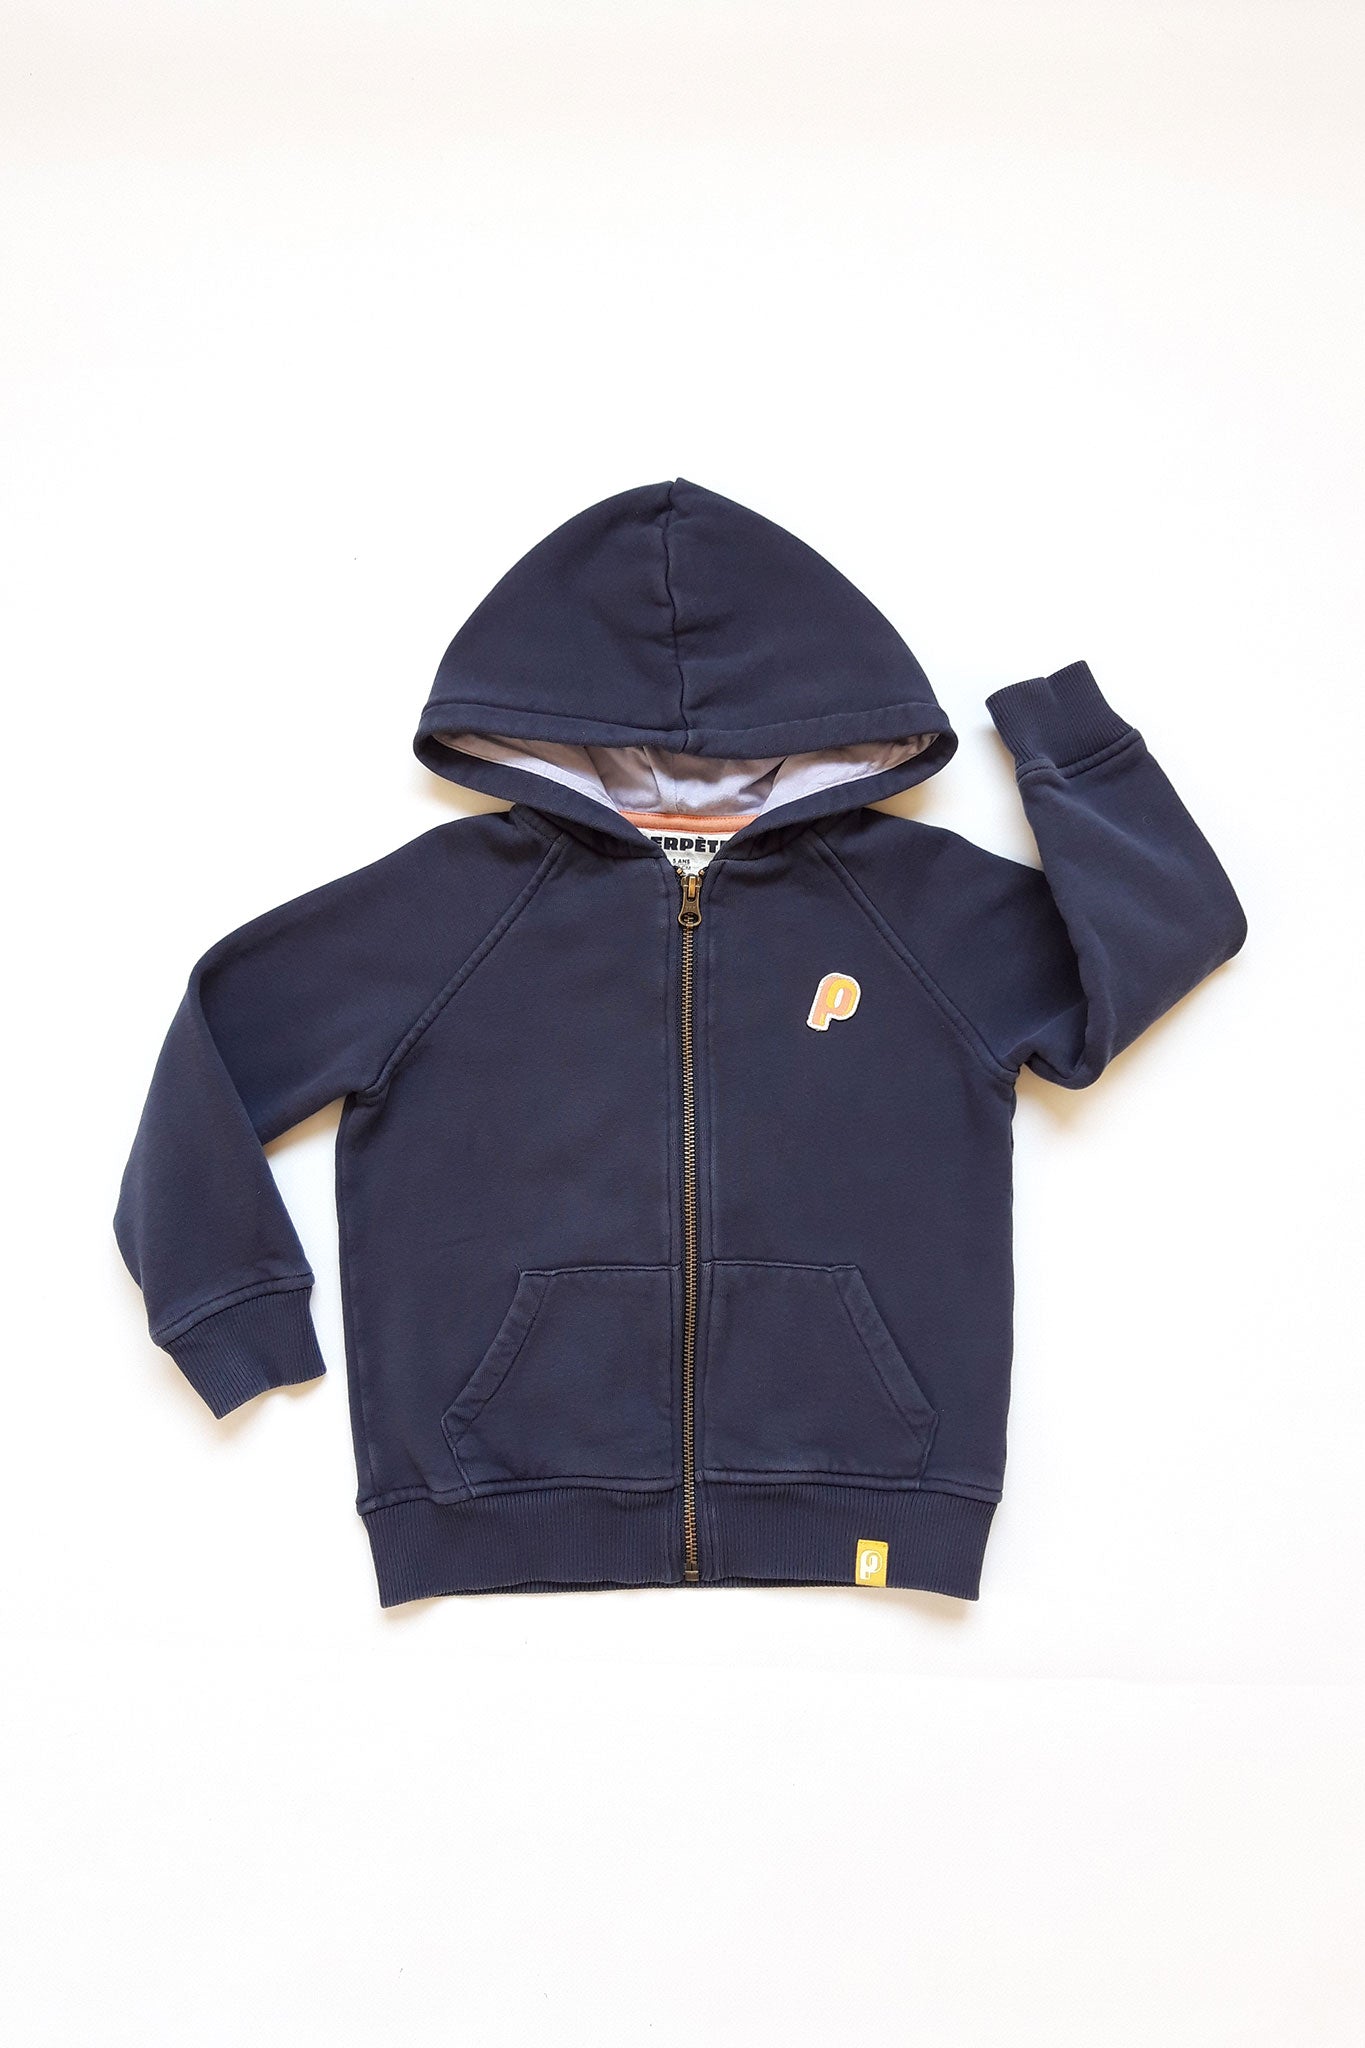 Comfy Hoodie marine - Comme neuf - 4 ans